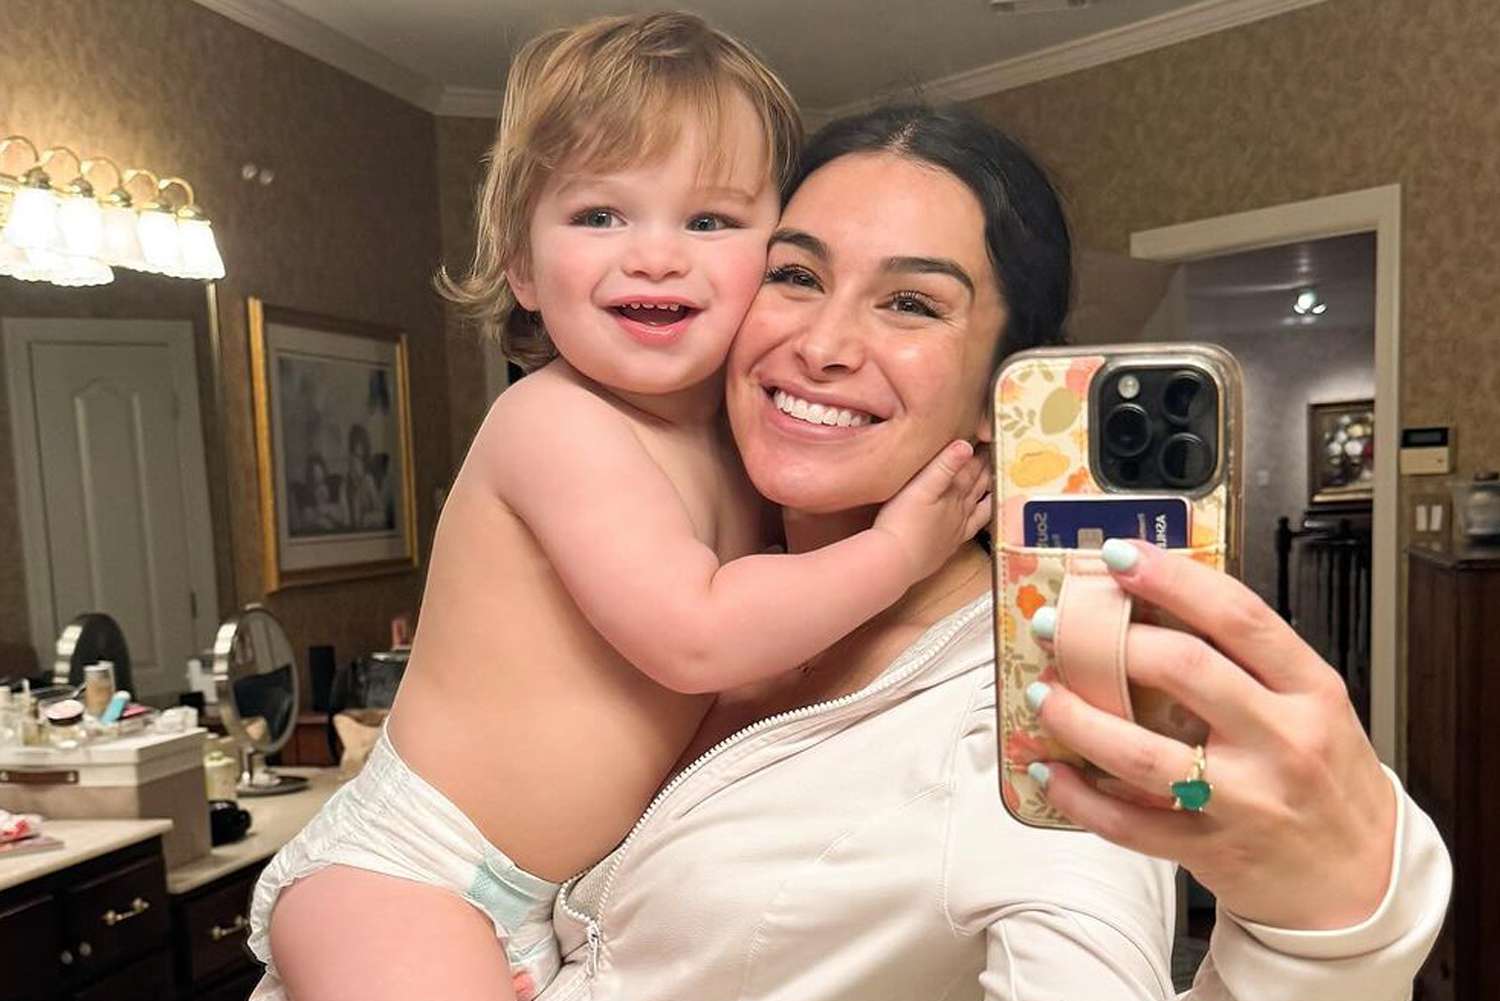 Pregnant Ashley Iaconetti Admits She's a 'Little Nervous' About Baby No. 2: 'Curious and Anxious' (Exclusive)